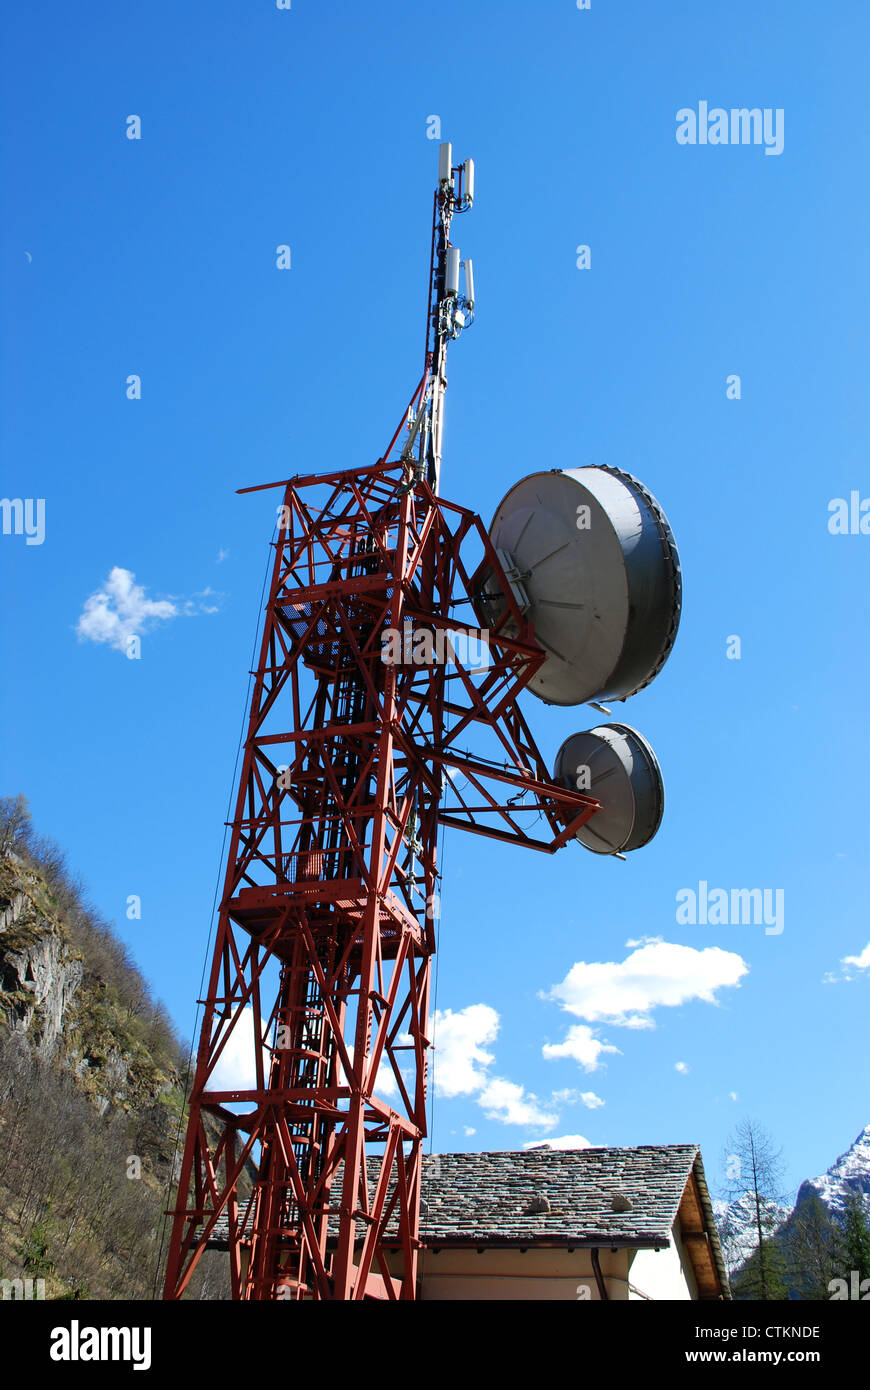 Huge communication antenna tower and satellite dishes against blue sky Stock Photo